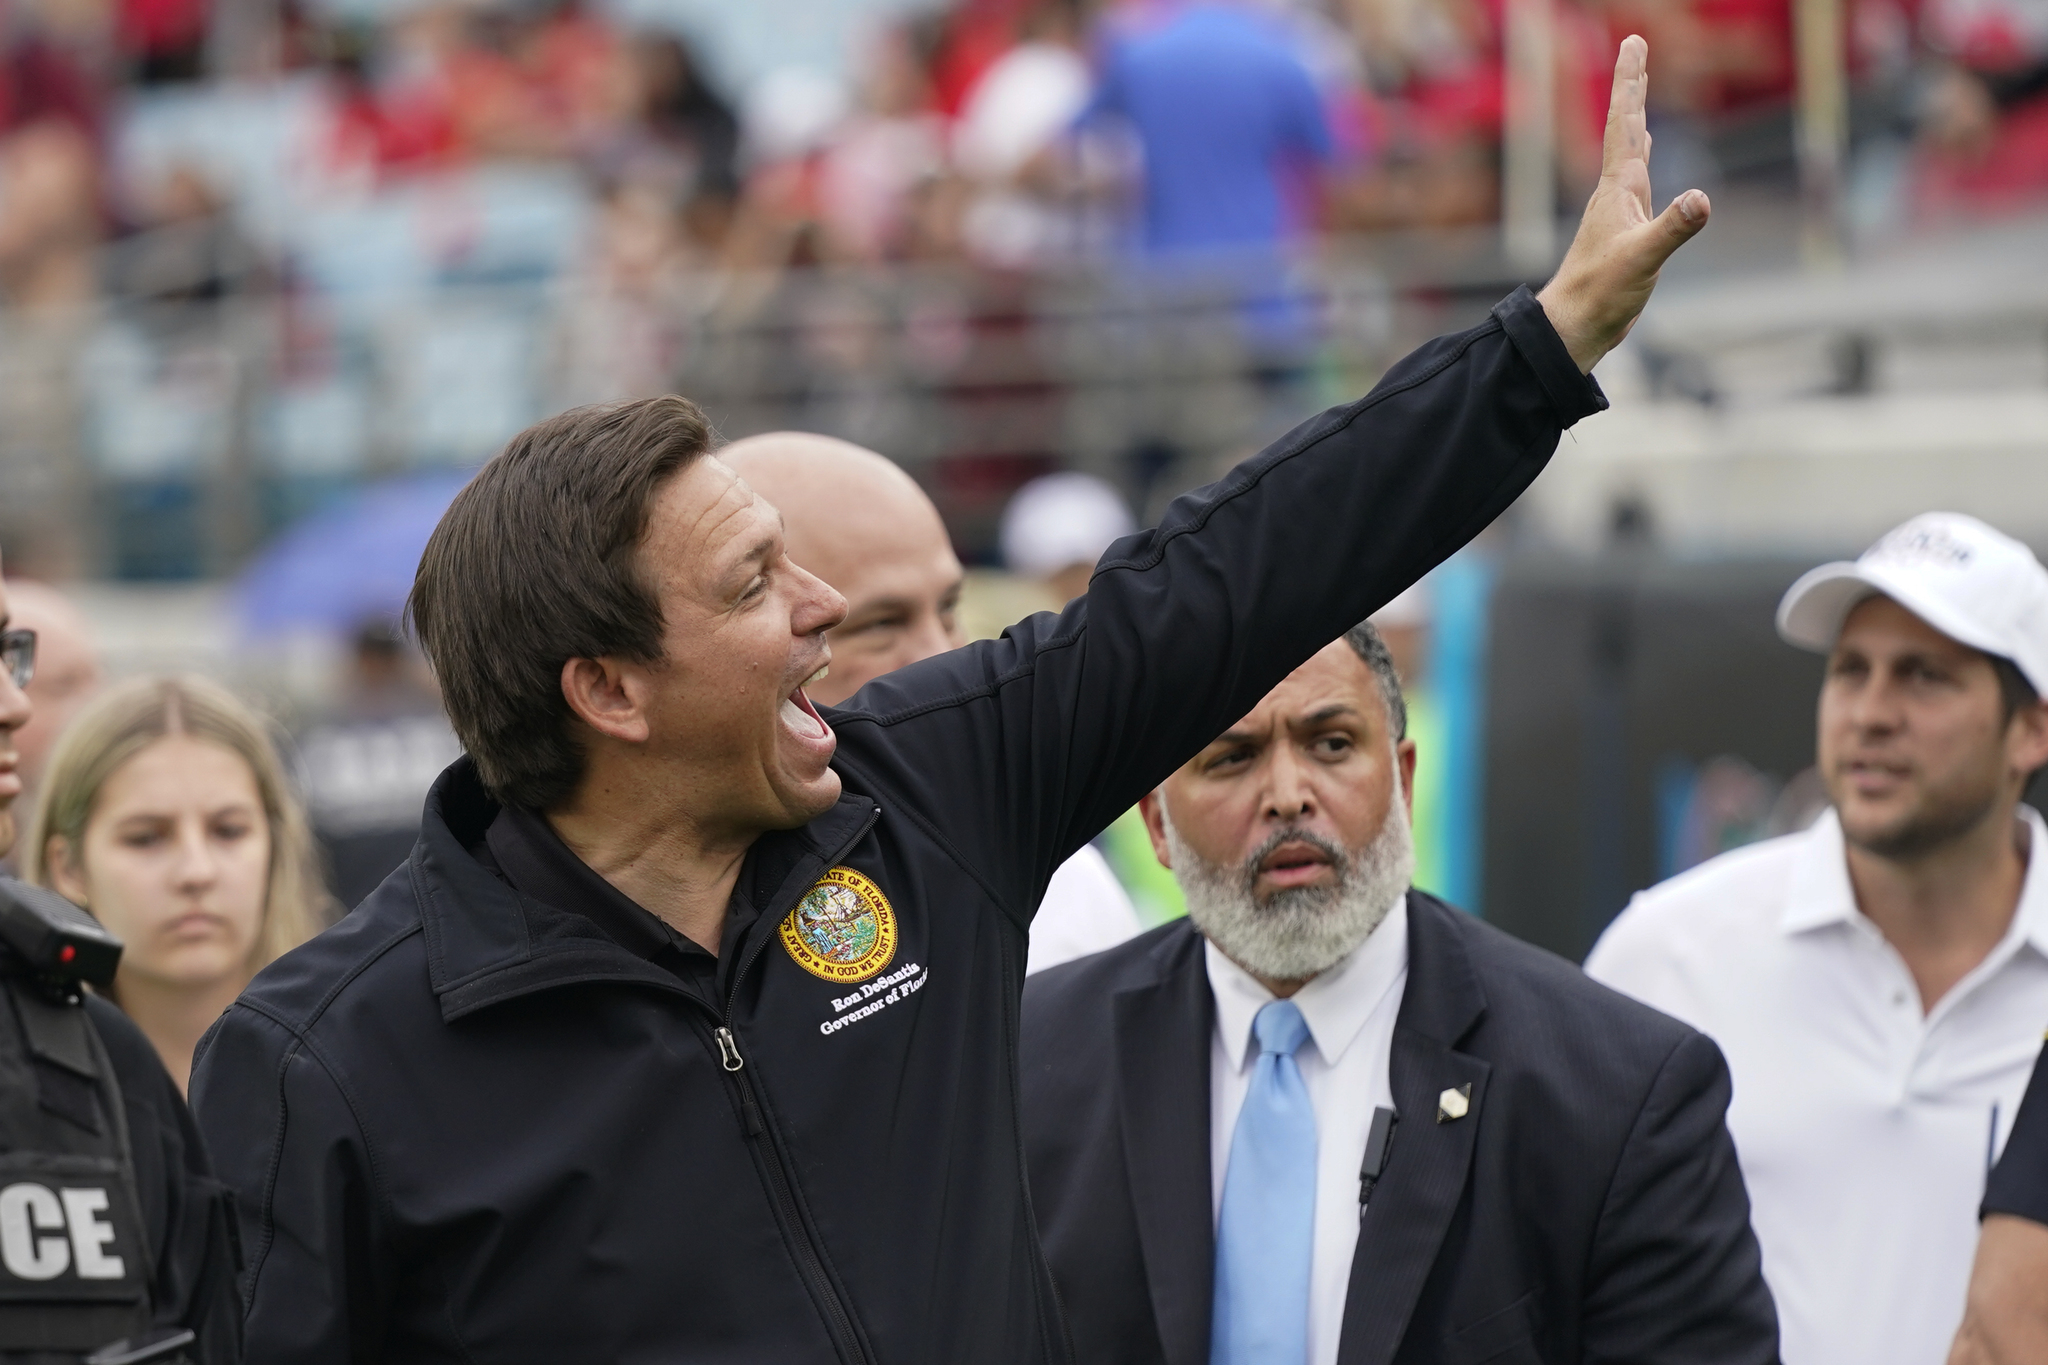 Florida Governor Ron DeSantis, at a college football game in October of 2022.